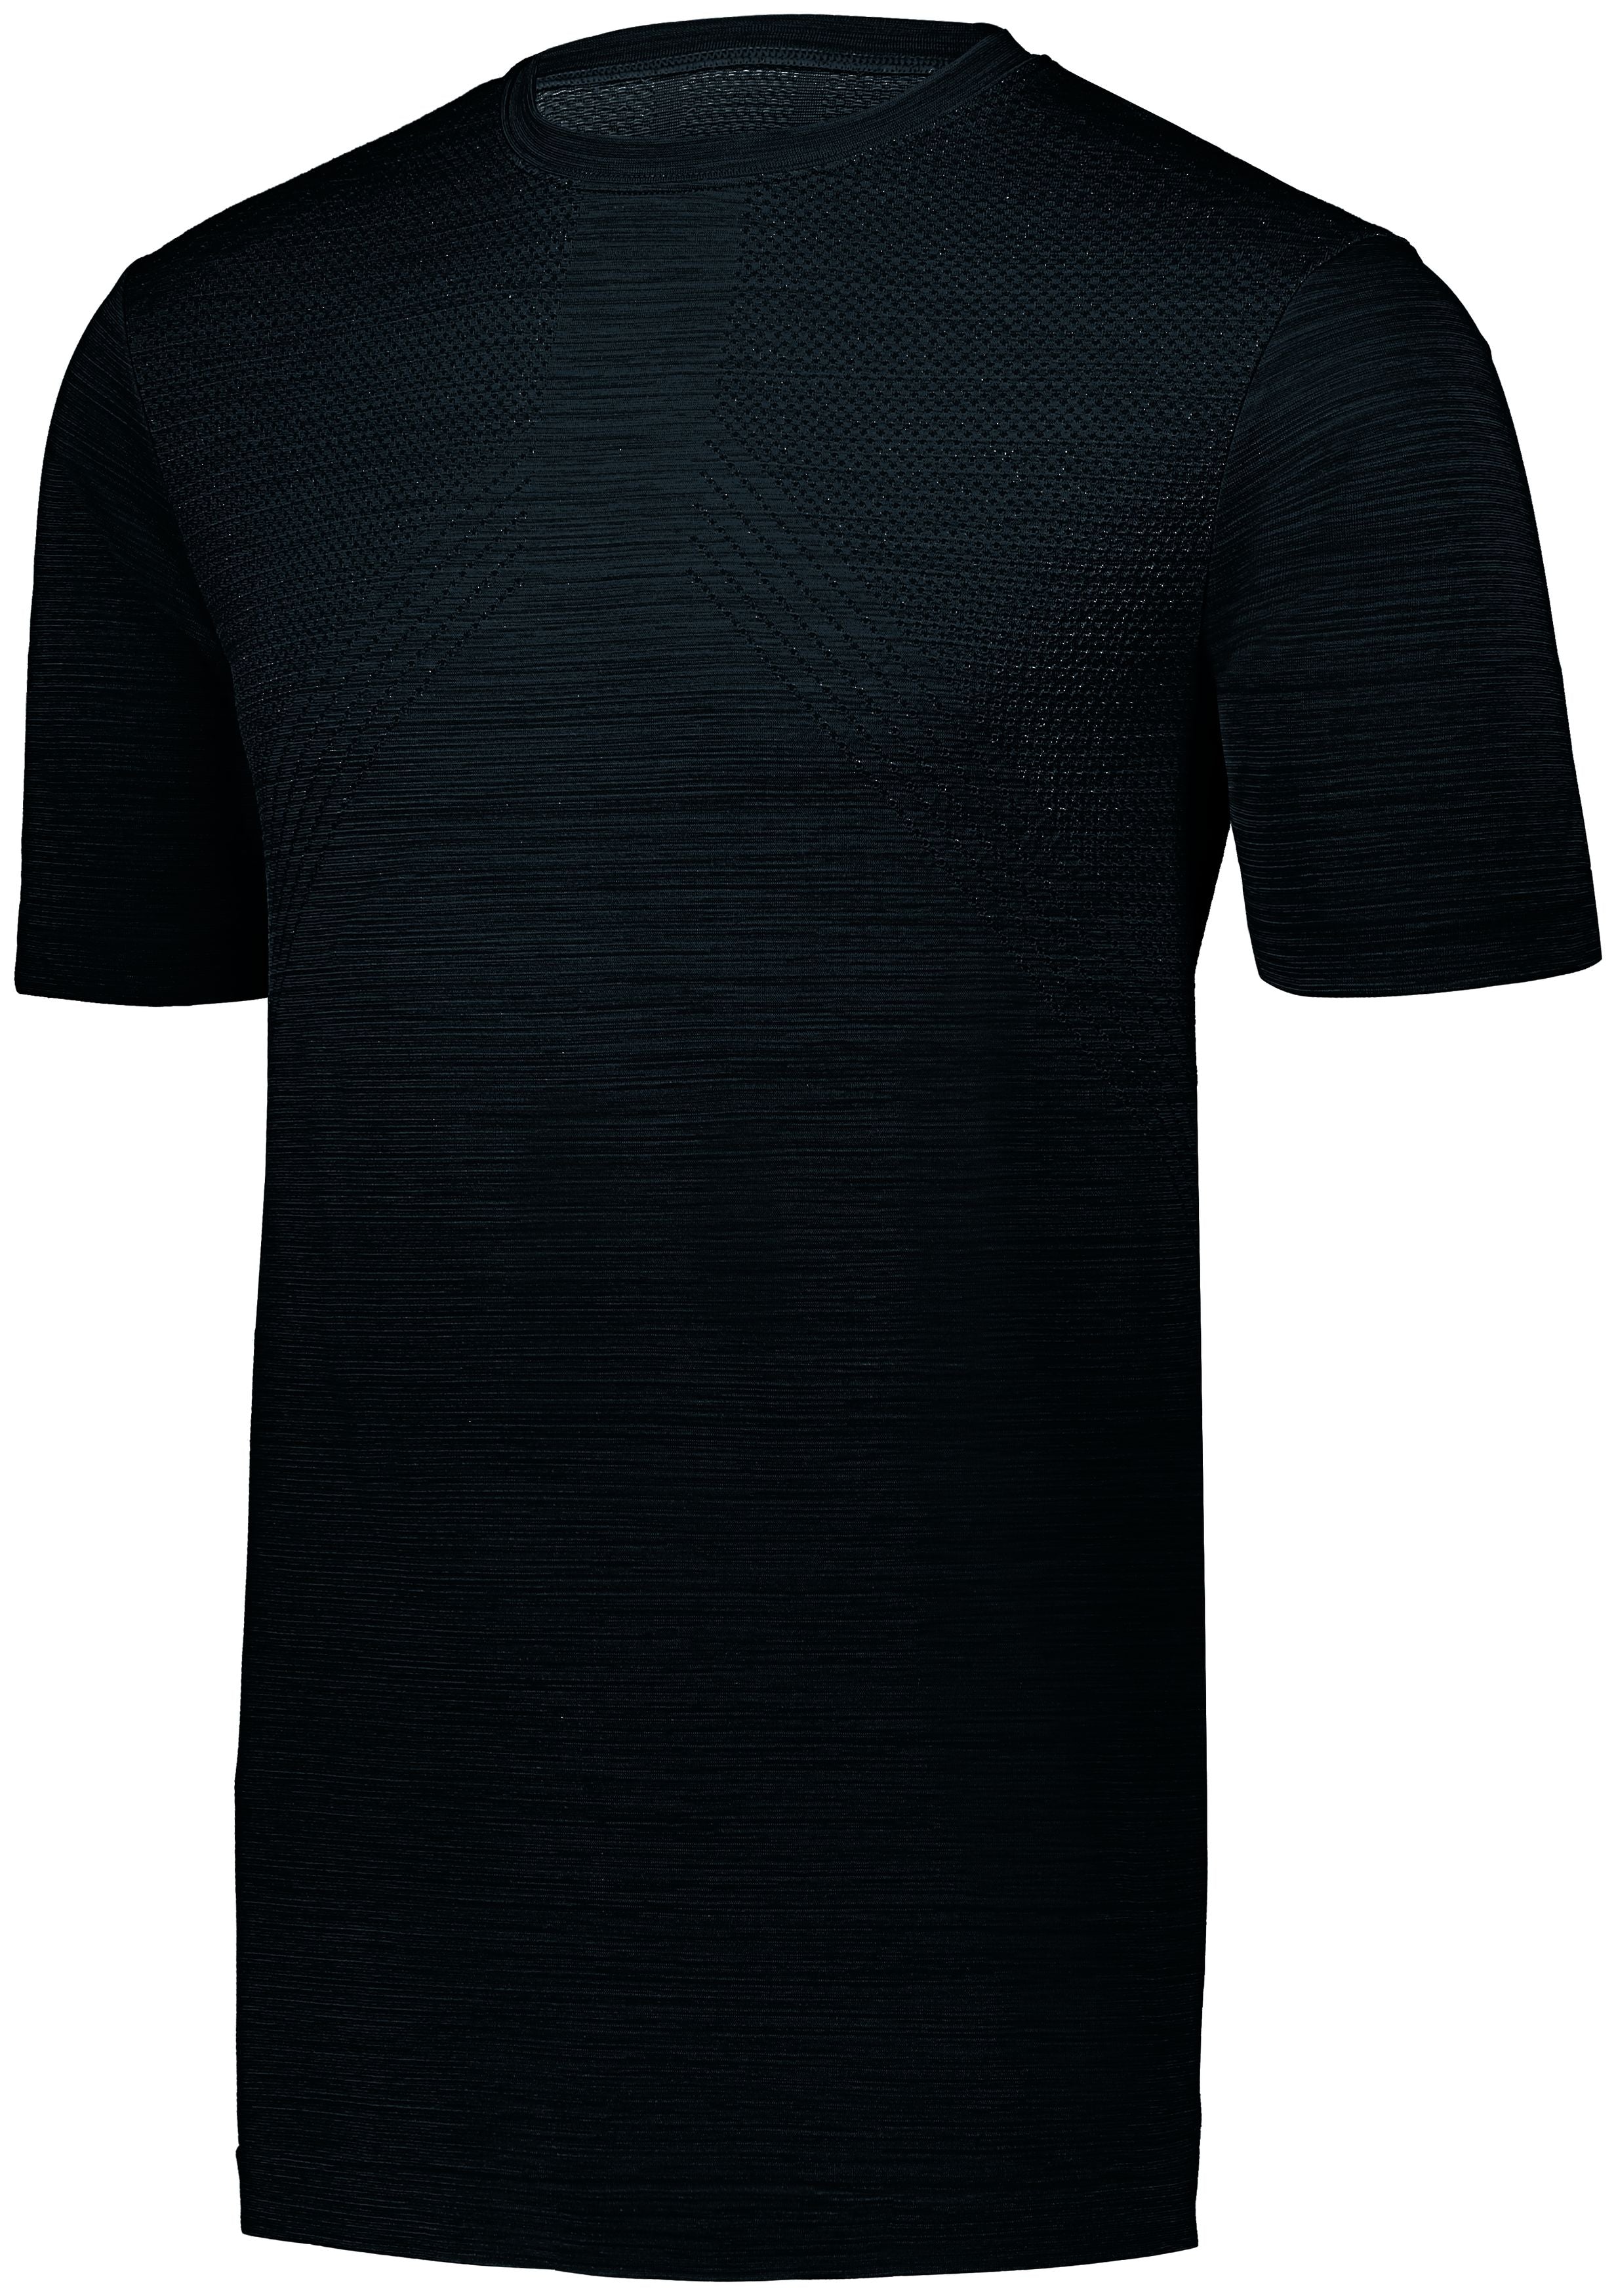 Holloway Striated Shirt Short Sleeve in Black  -Part of the Adult, Holloway, Shirts, Striated-Collection product lines at KanaleyCreations.com